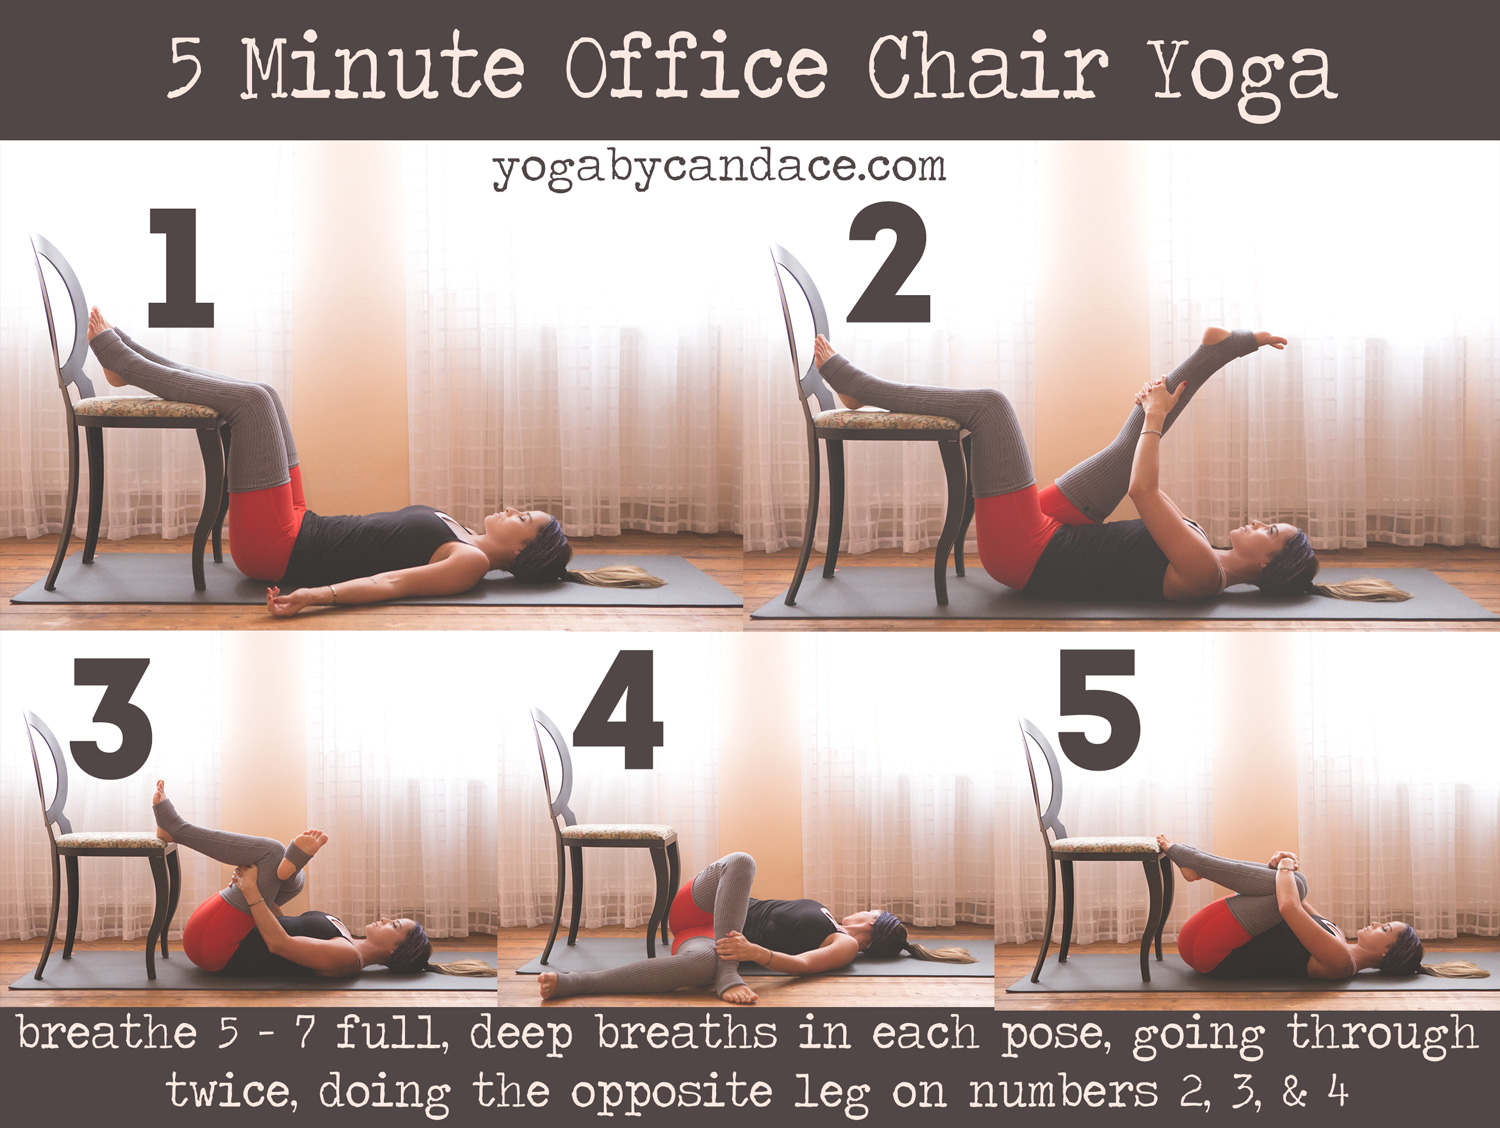 Relieve Work Stress: 20 Minutes Chair Yoga - YouTube